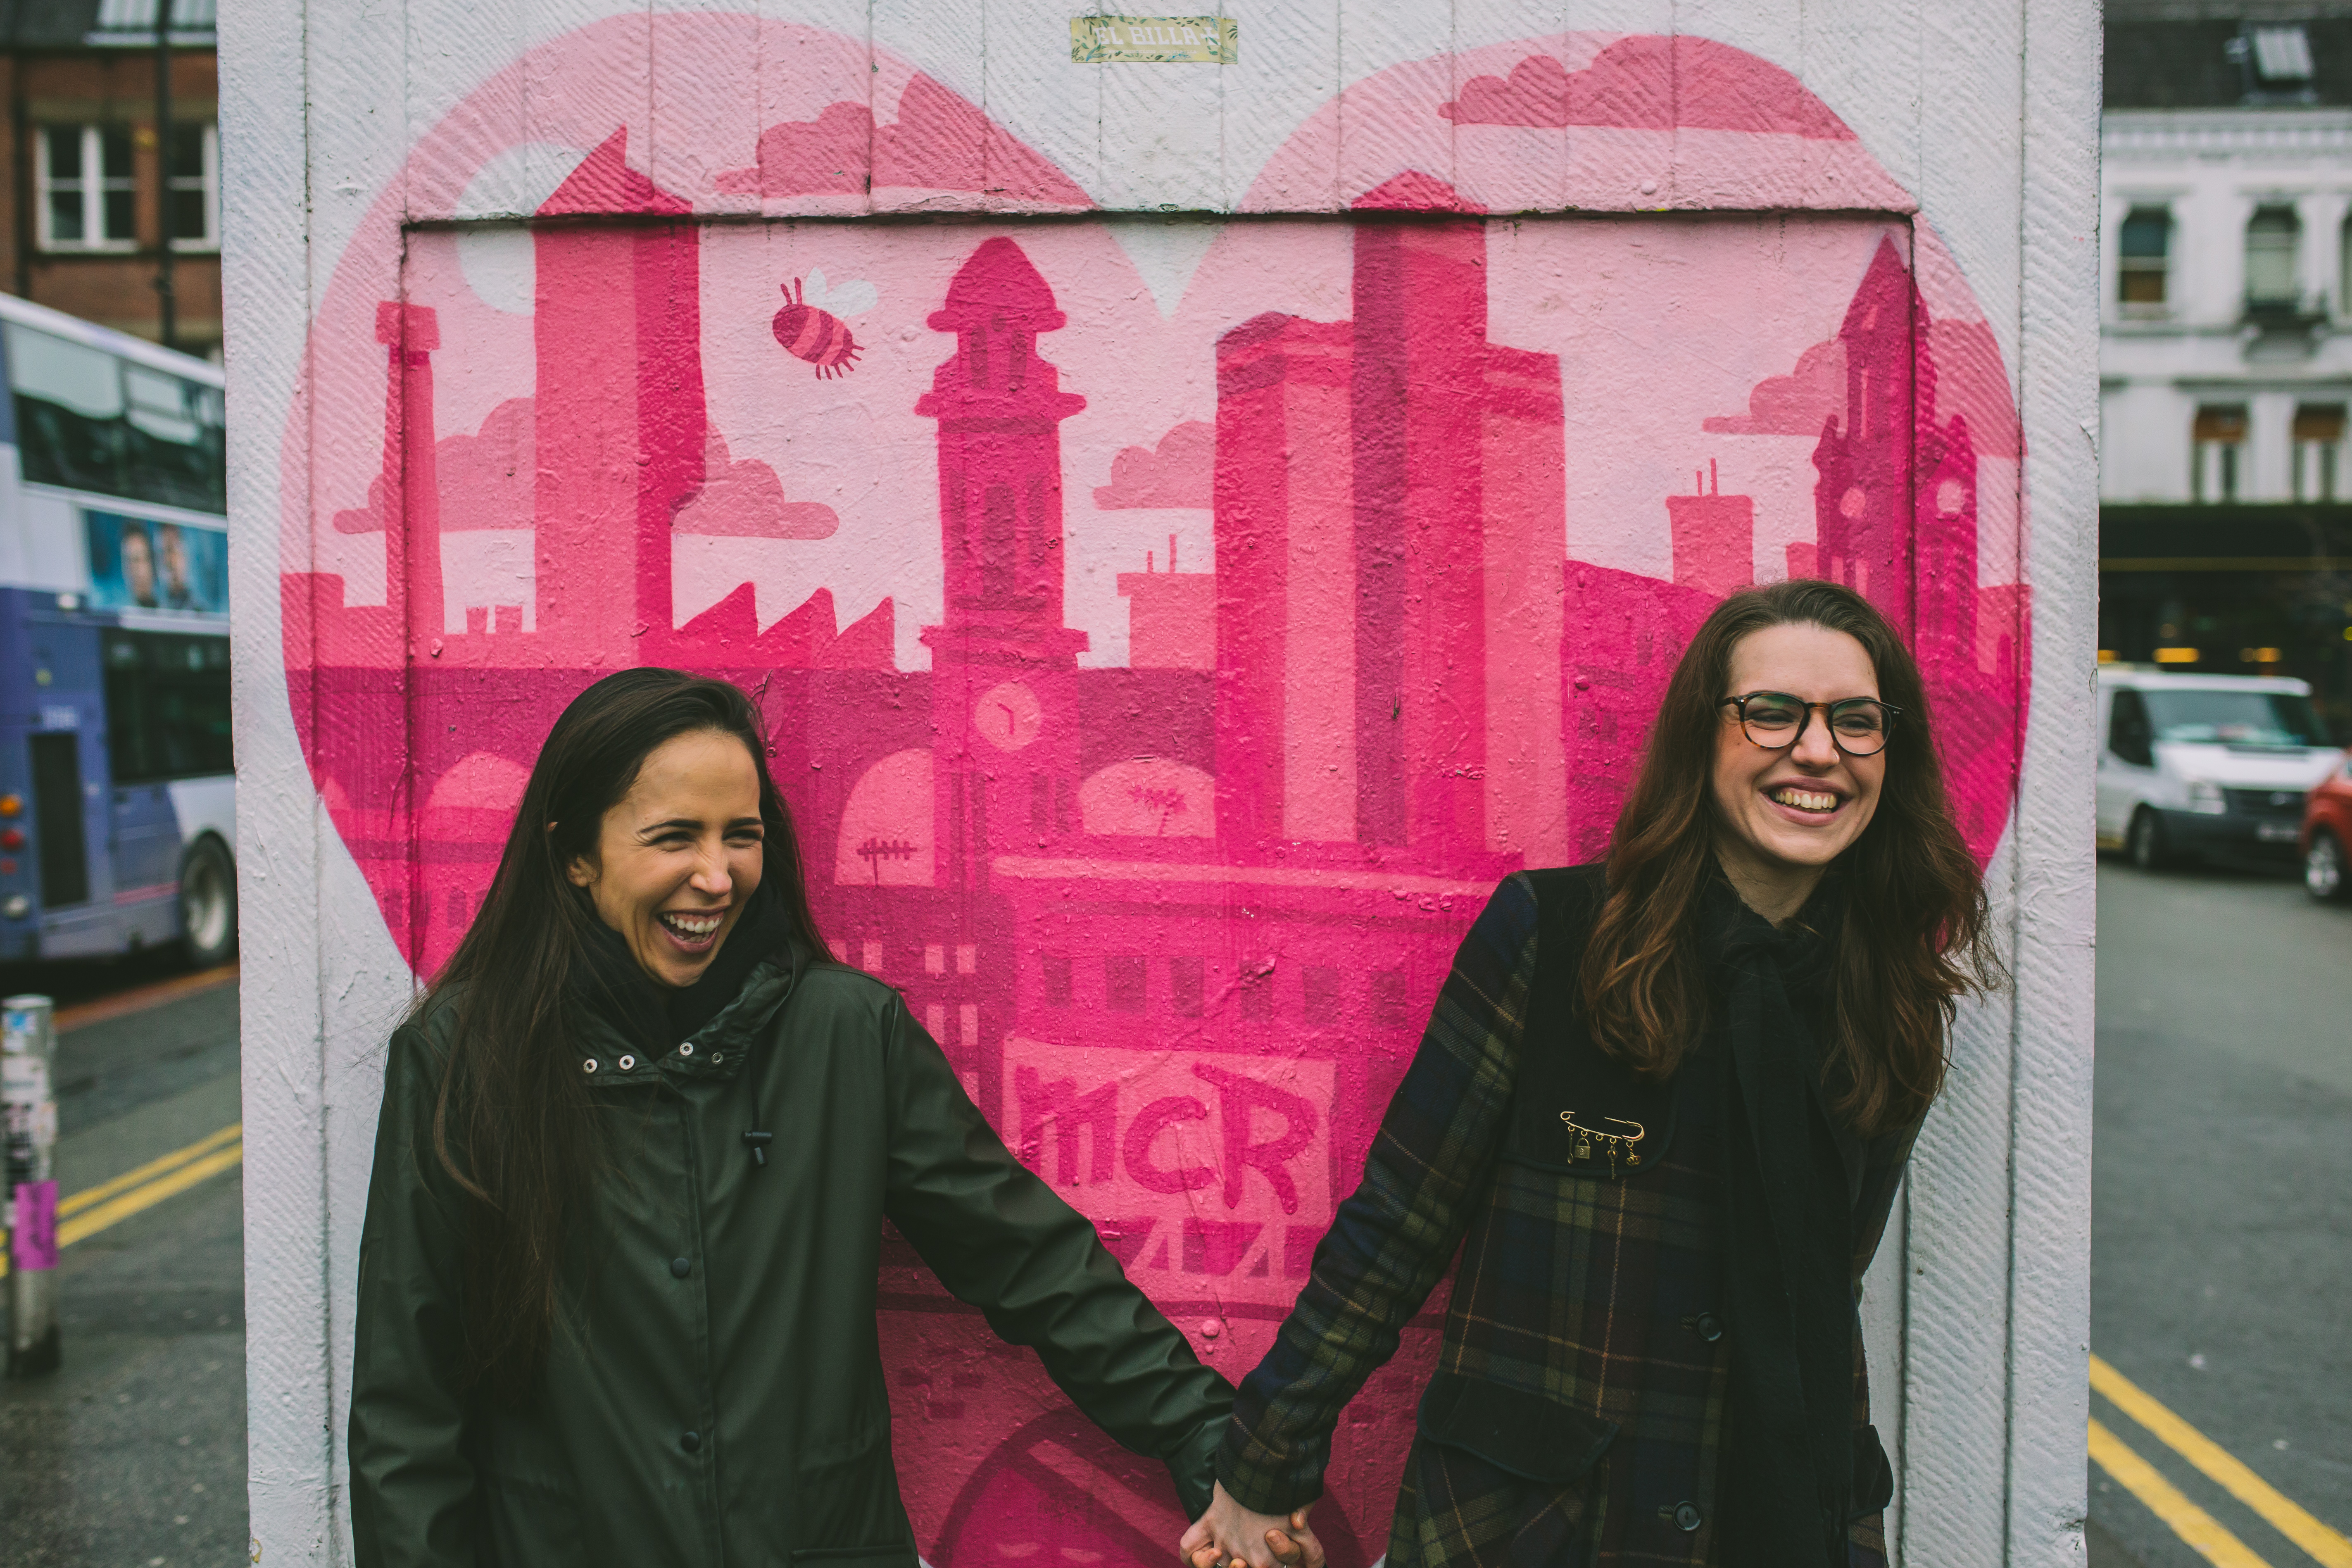 Female couple laugh holding hands in front of Manchester graffiti 